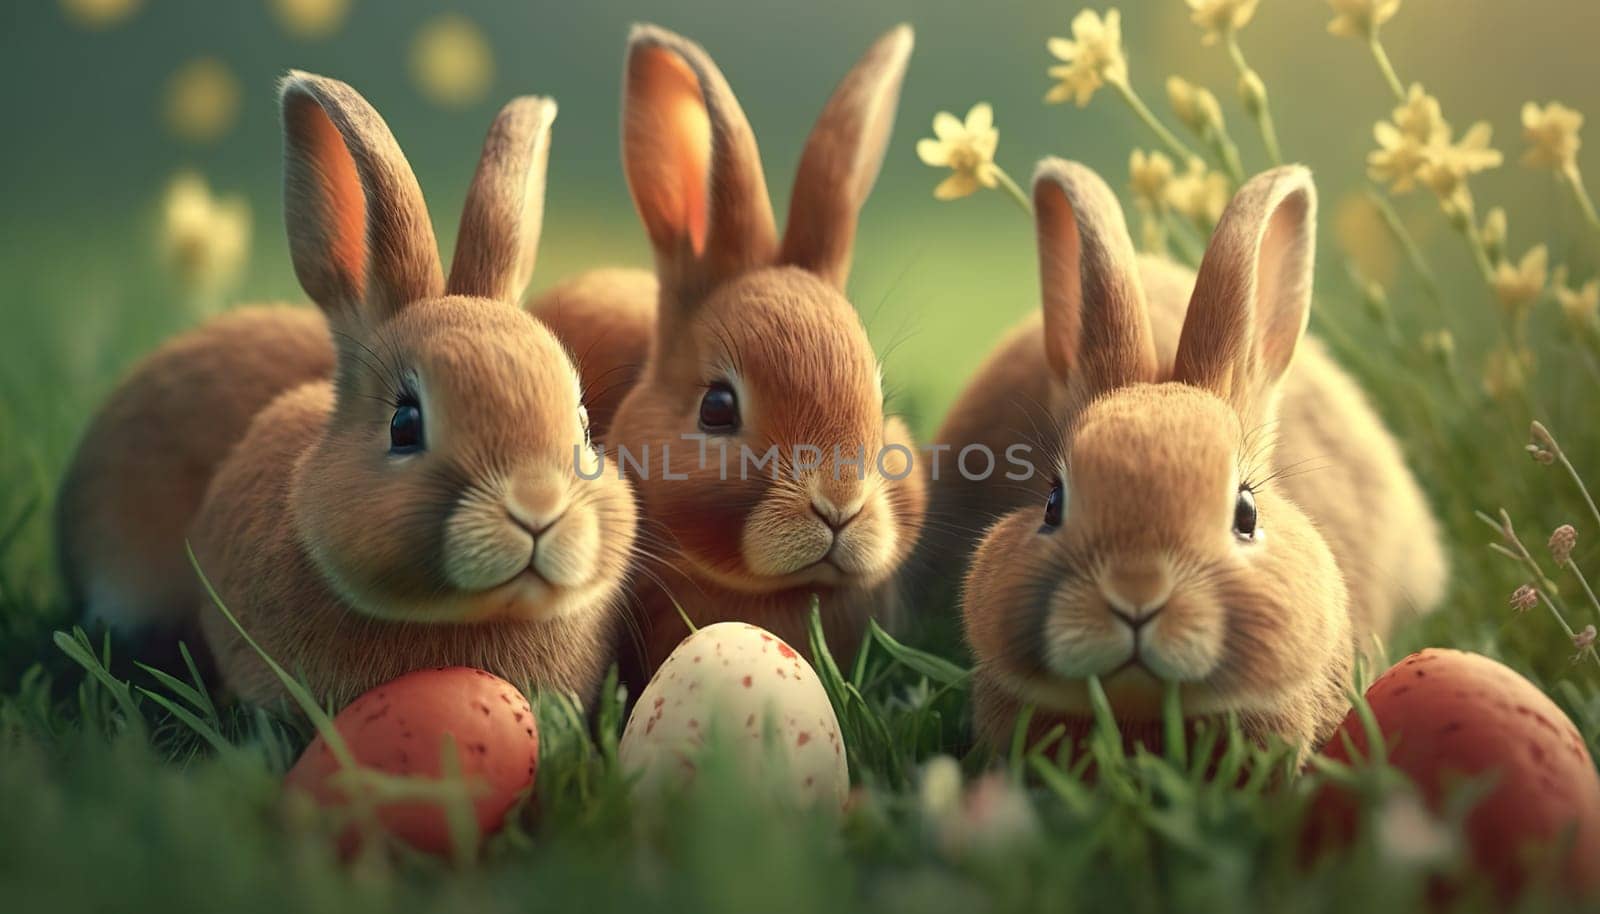 Easter Bunnies with Decorated Eggs by chrisroll